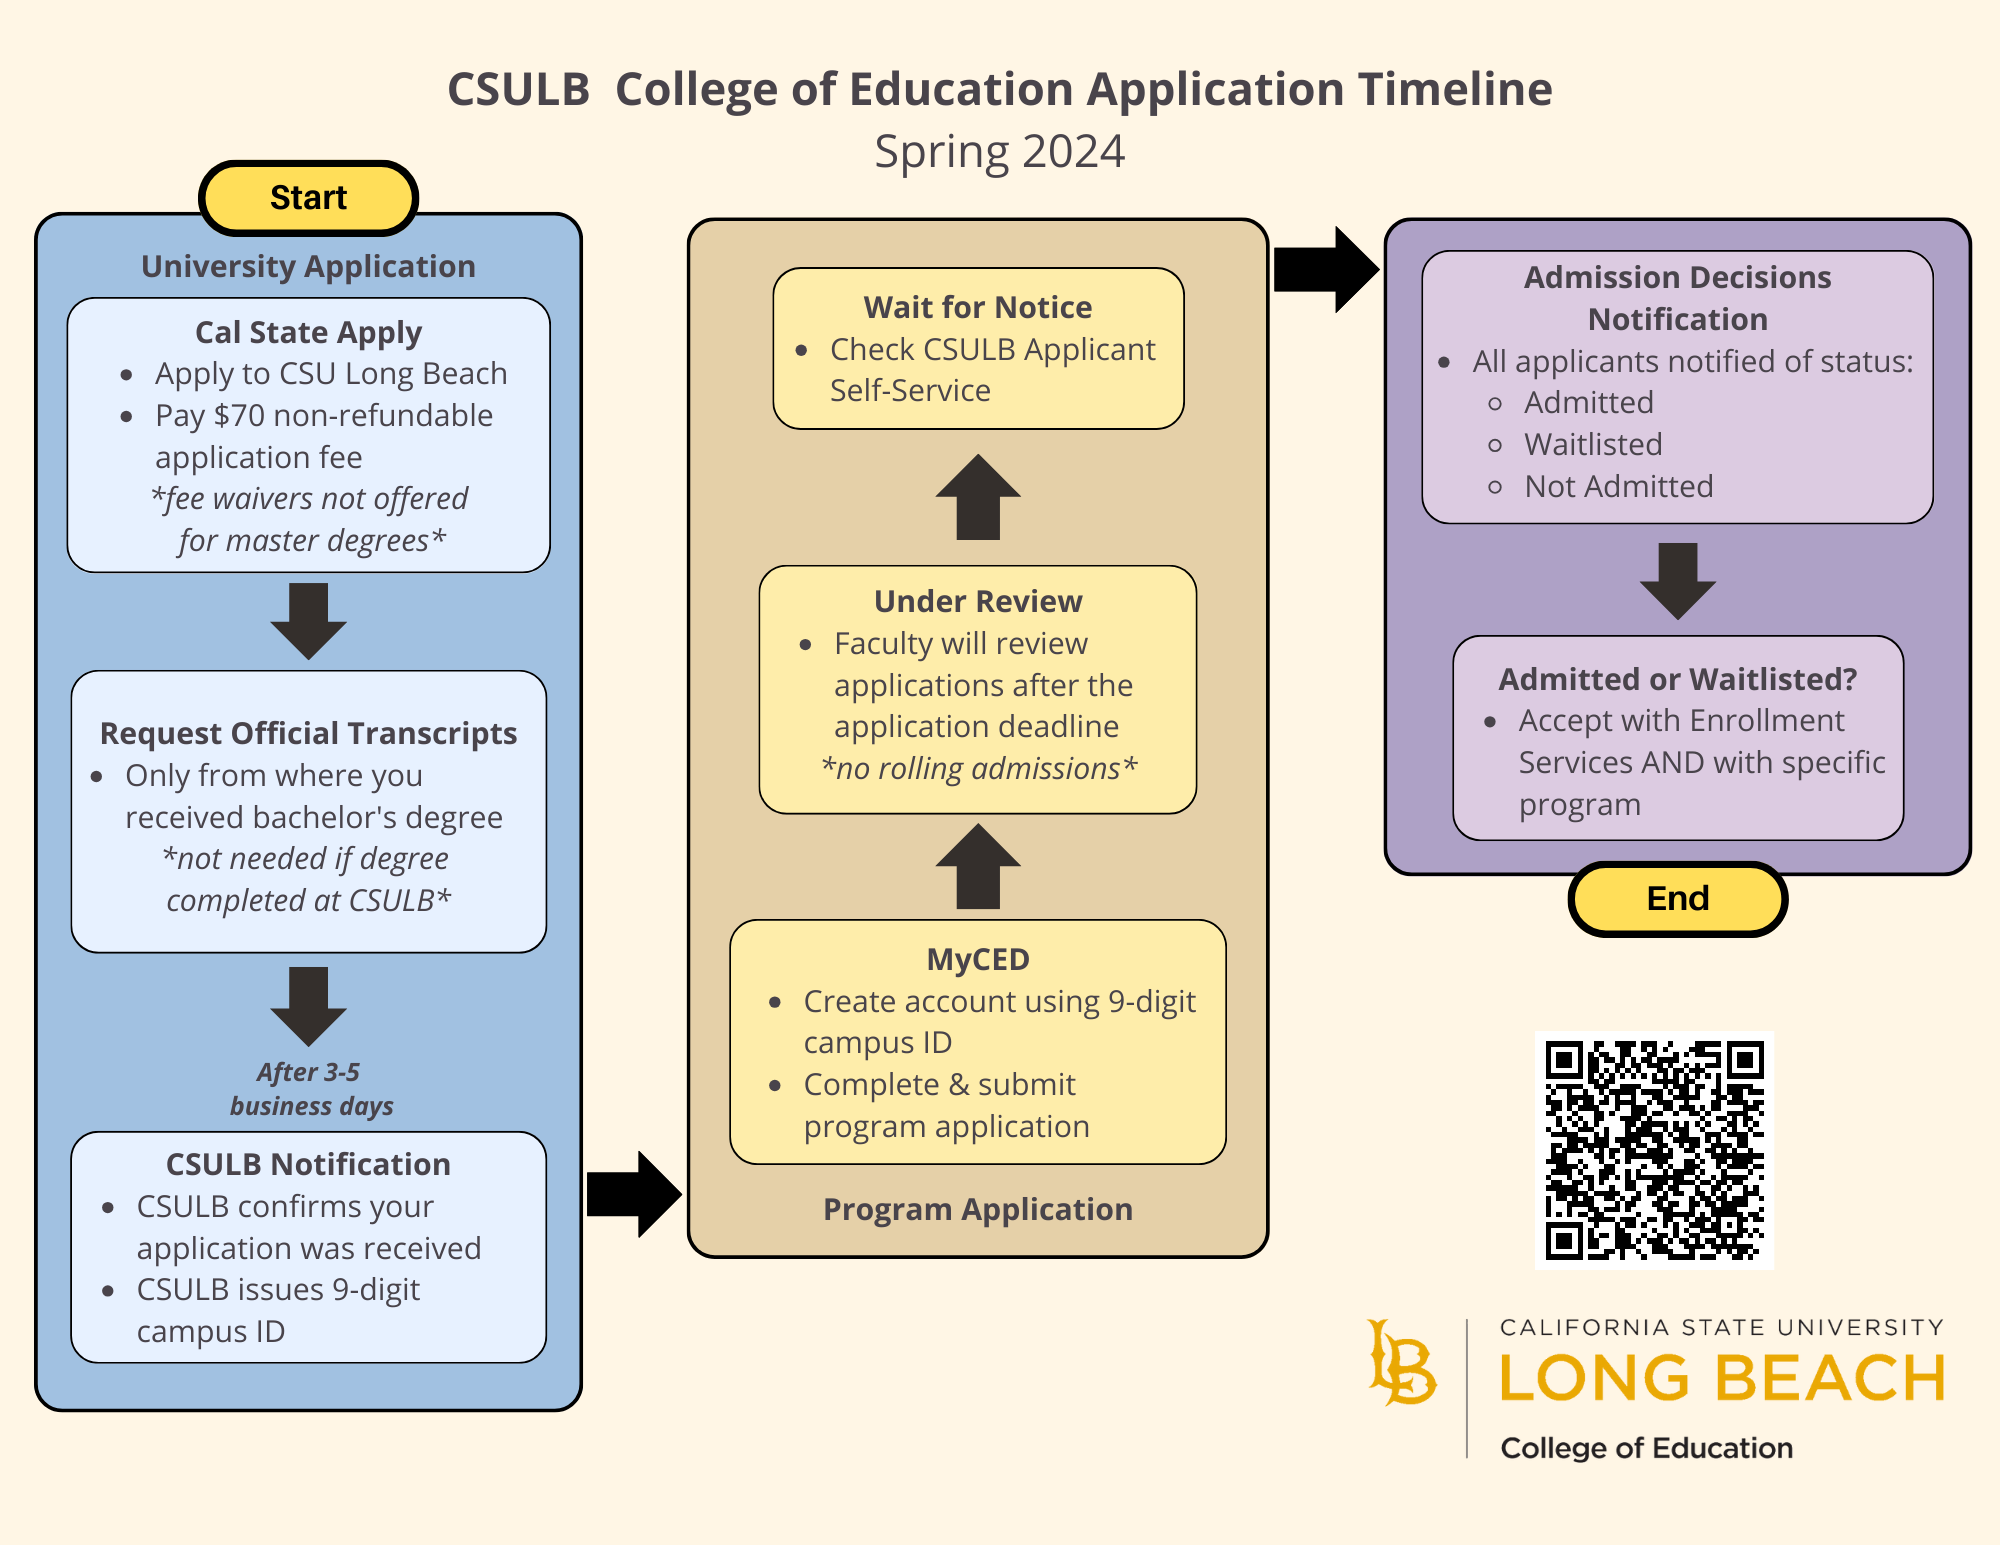 Spring 2024 application flow chart